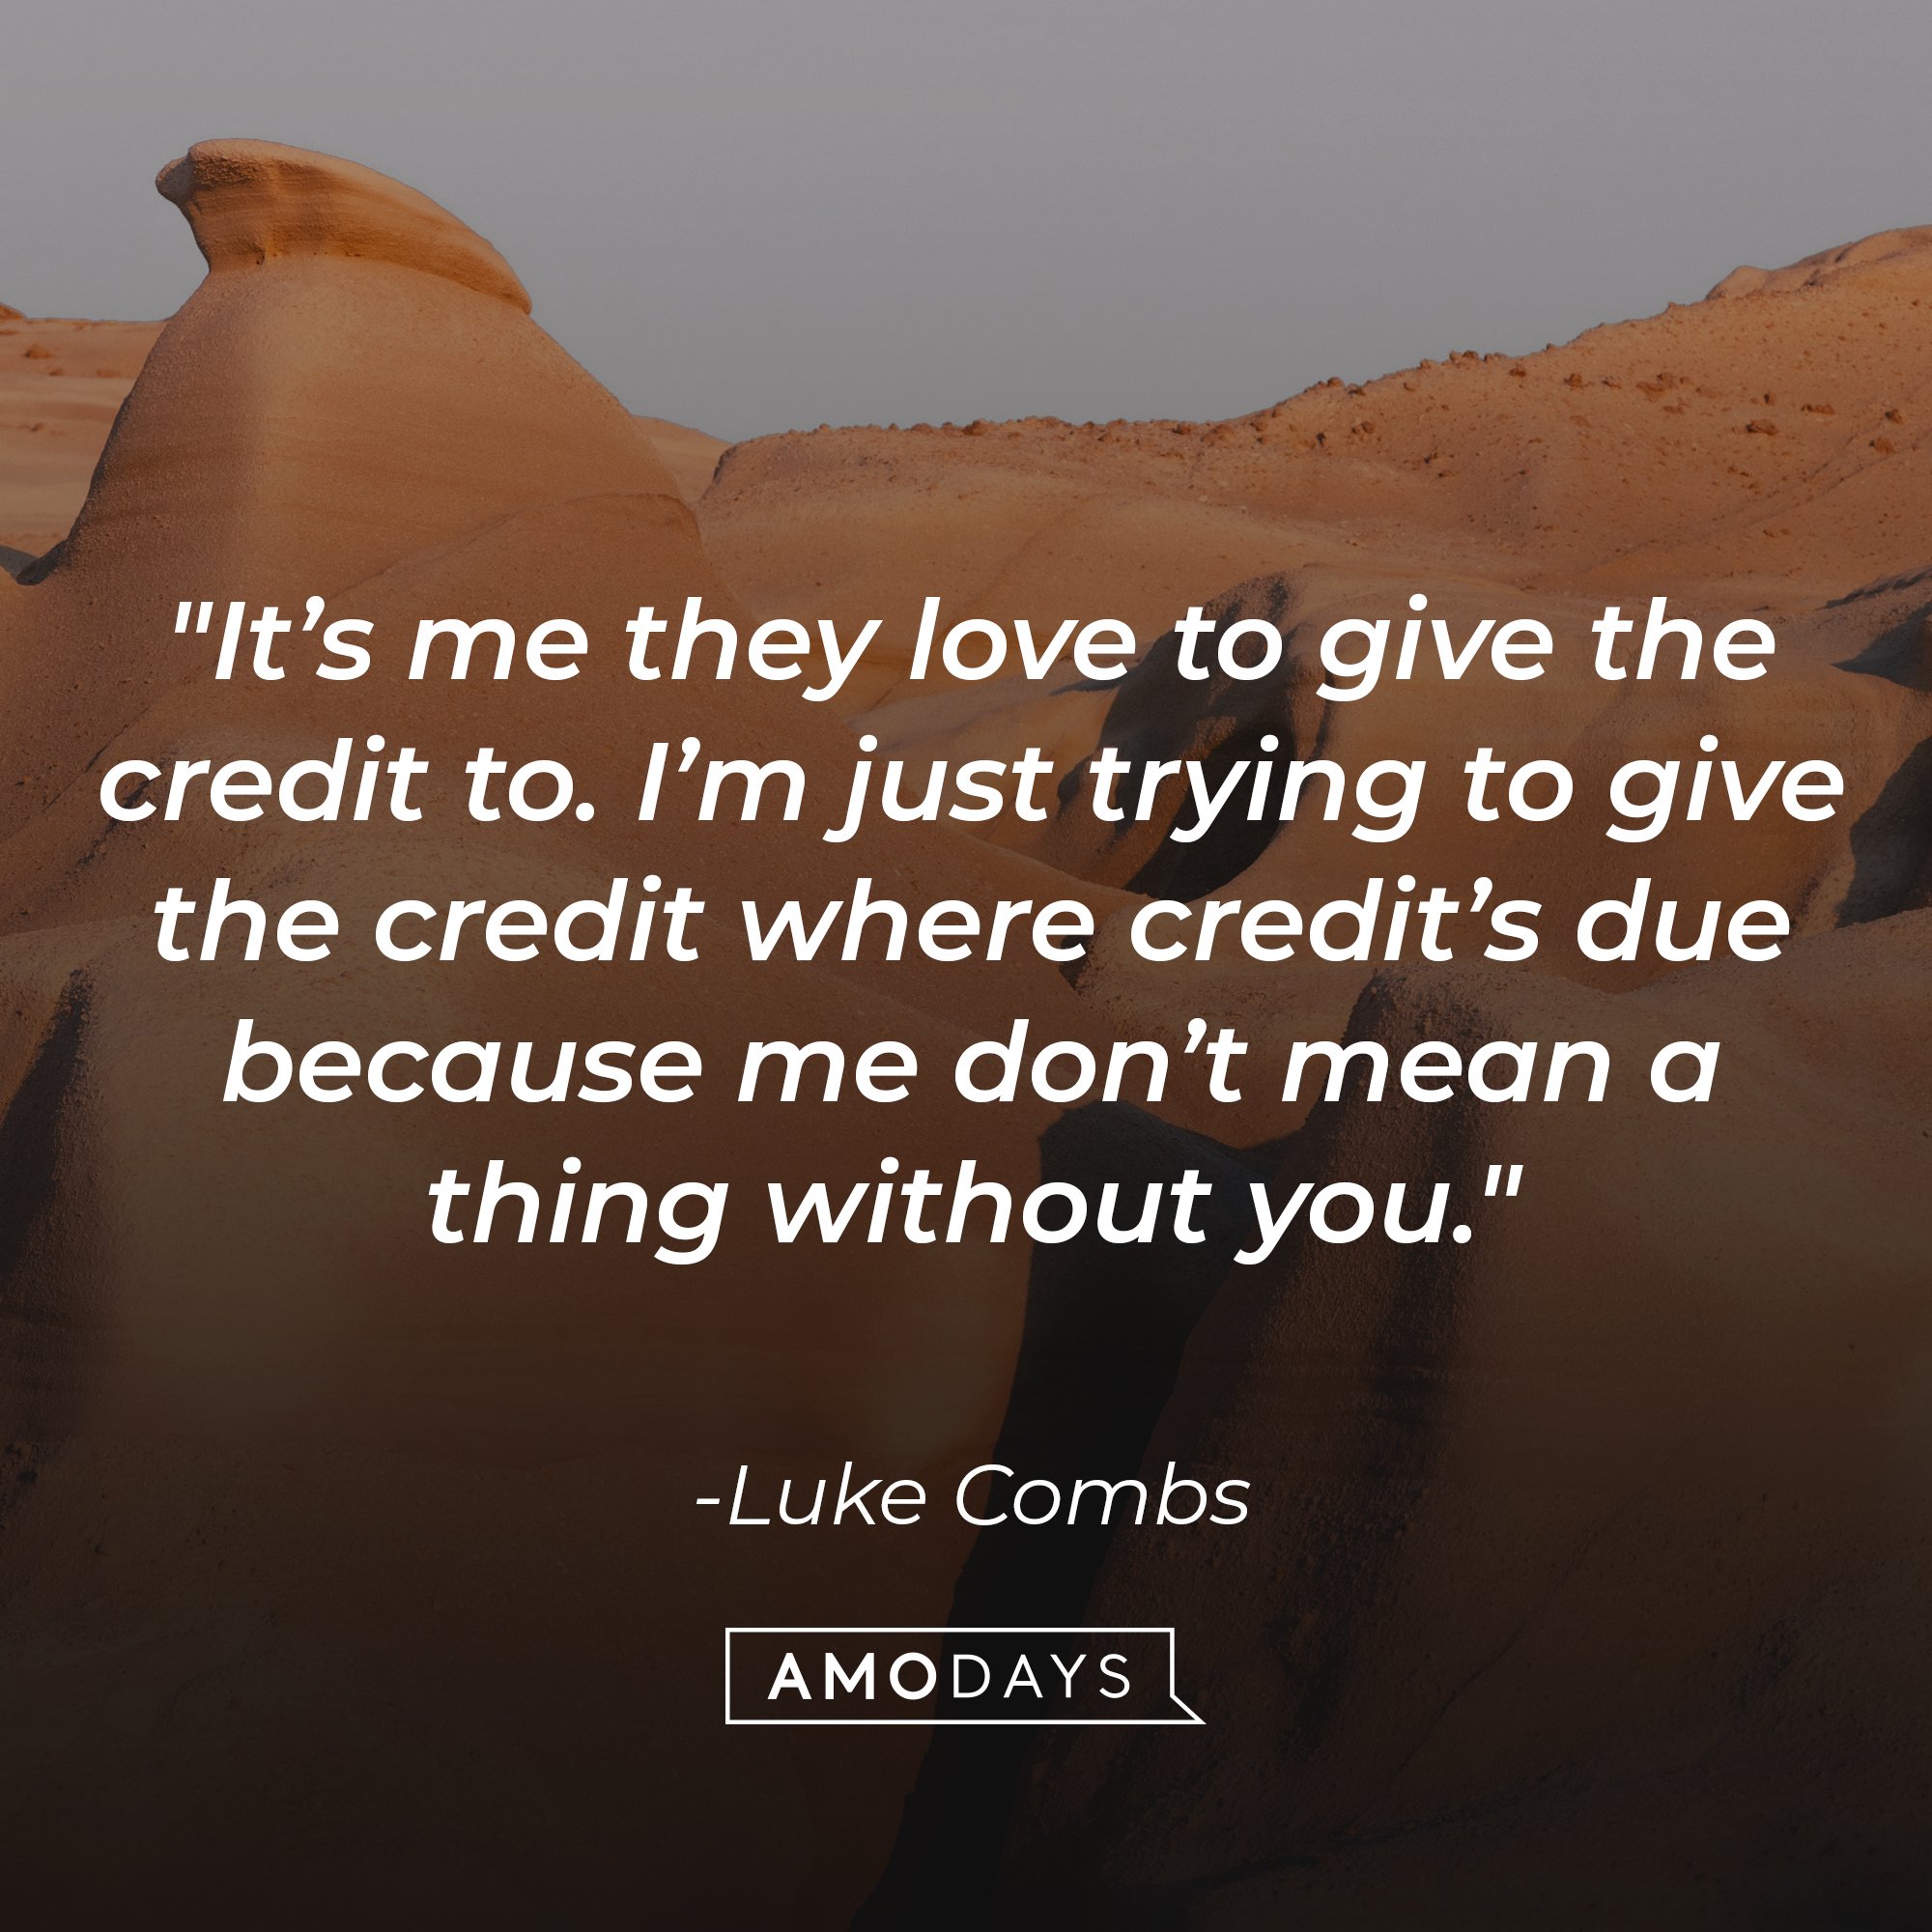 Luke Combs's quote "It’s me they love to give the credit to. I’m just trying to give the credit where credit’s due because me don’t mean a thing without you." | Source: Unsplash.com